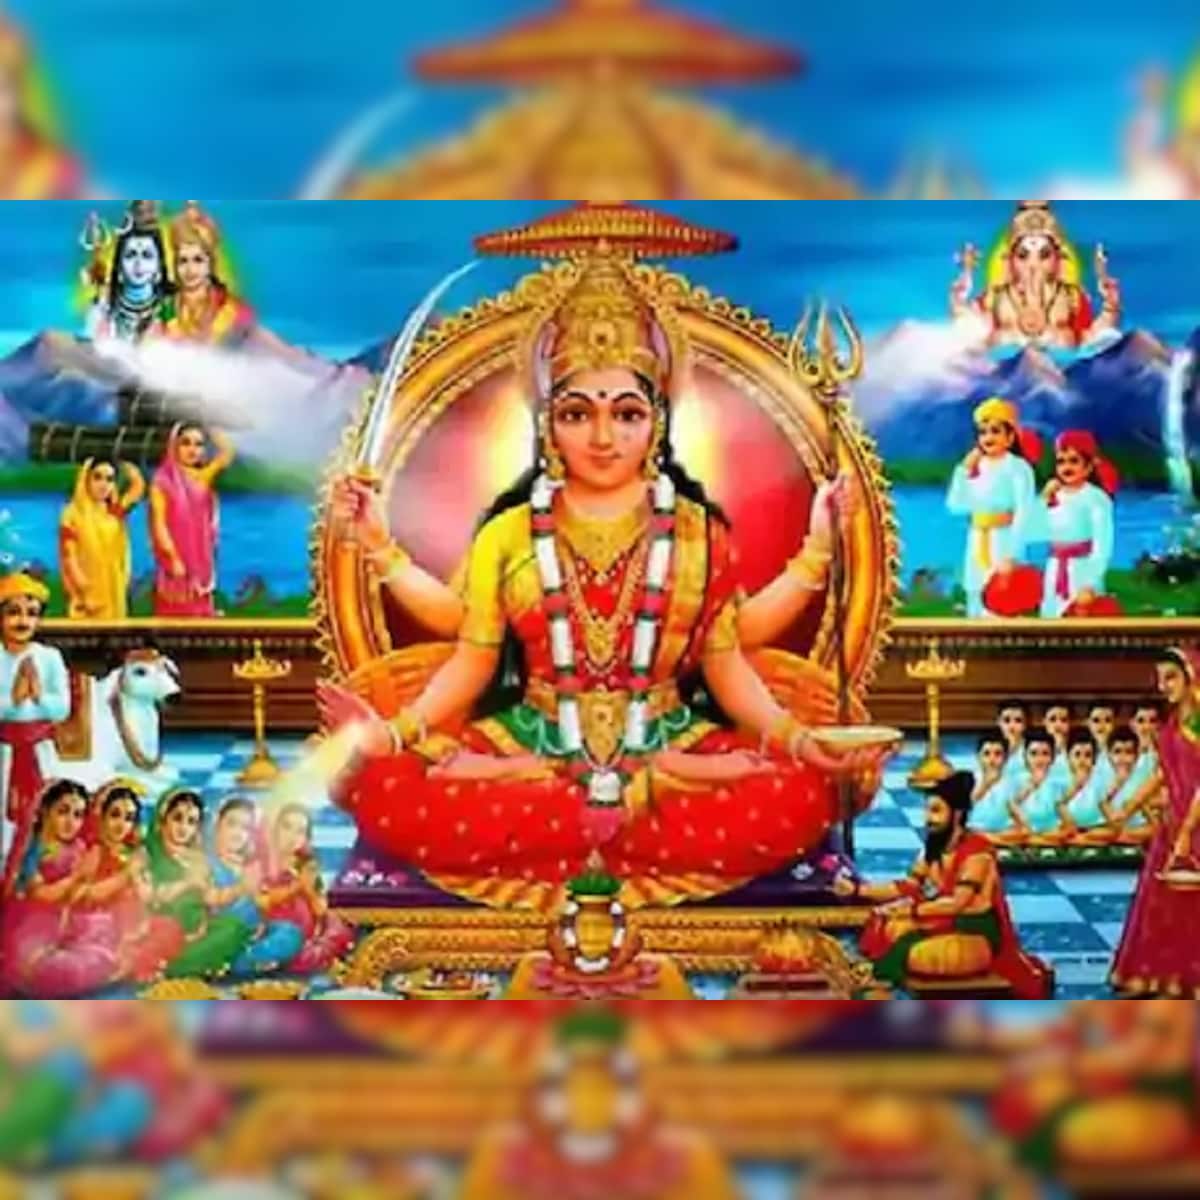 Collection of Amazing 4K Santoshi Mata Images: Over 999+ Images